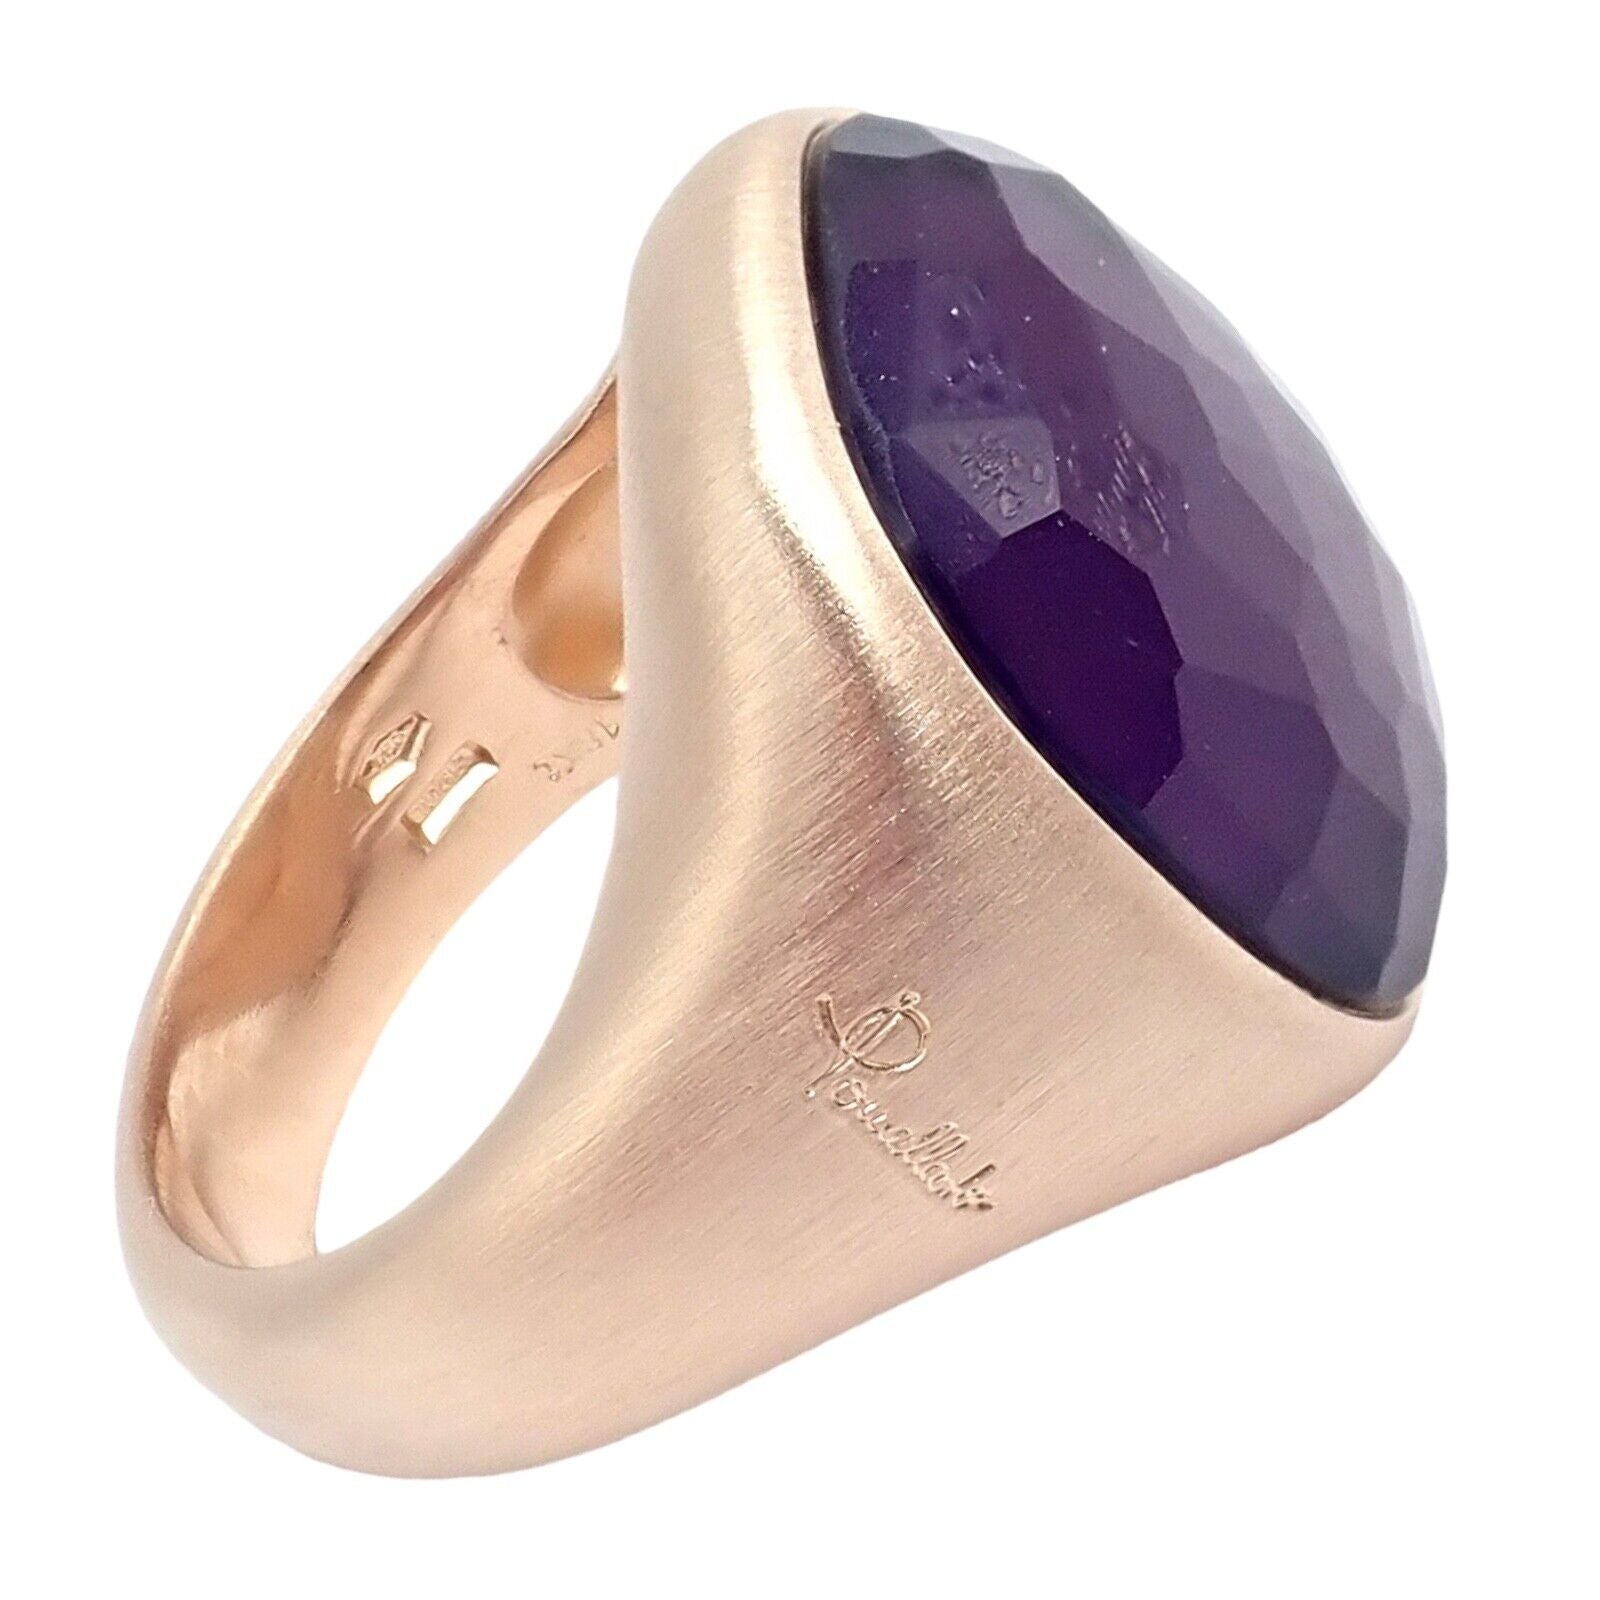 Pomellato Jewelry & Watches:Vintage & Antique Jewelry:Rings Authentic! Pomellato 18k Rose Gold Large Faceted Amethyst Victoria Ring sz 6.5